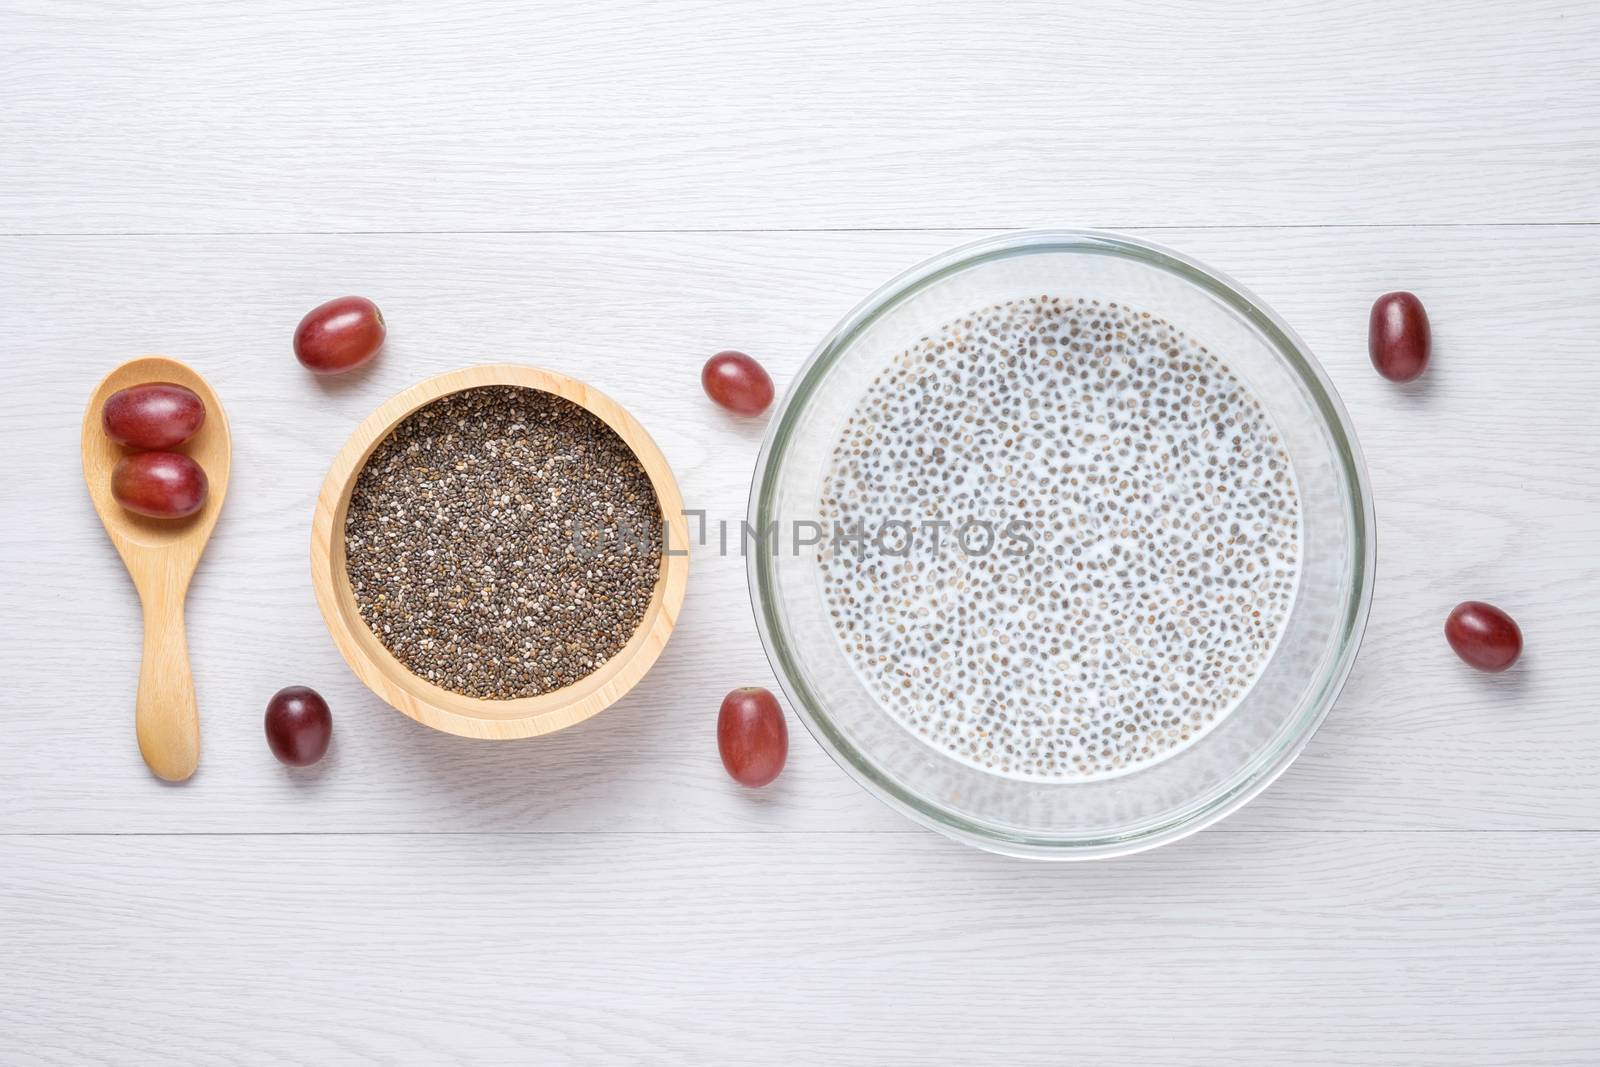 chai seed with milk in grass bowl and raw seed in wooden bowl put next to wooden spoon, use red grape to set beautify this photo